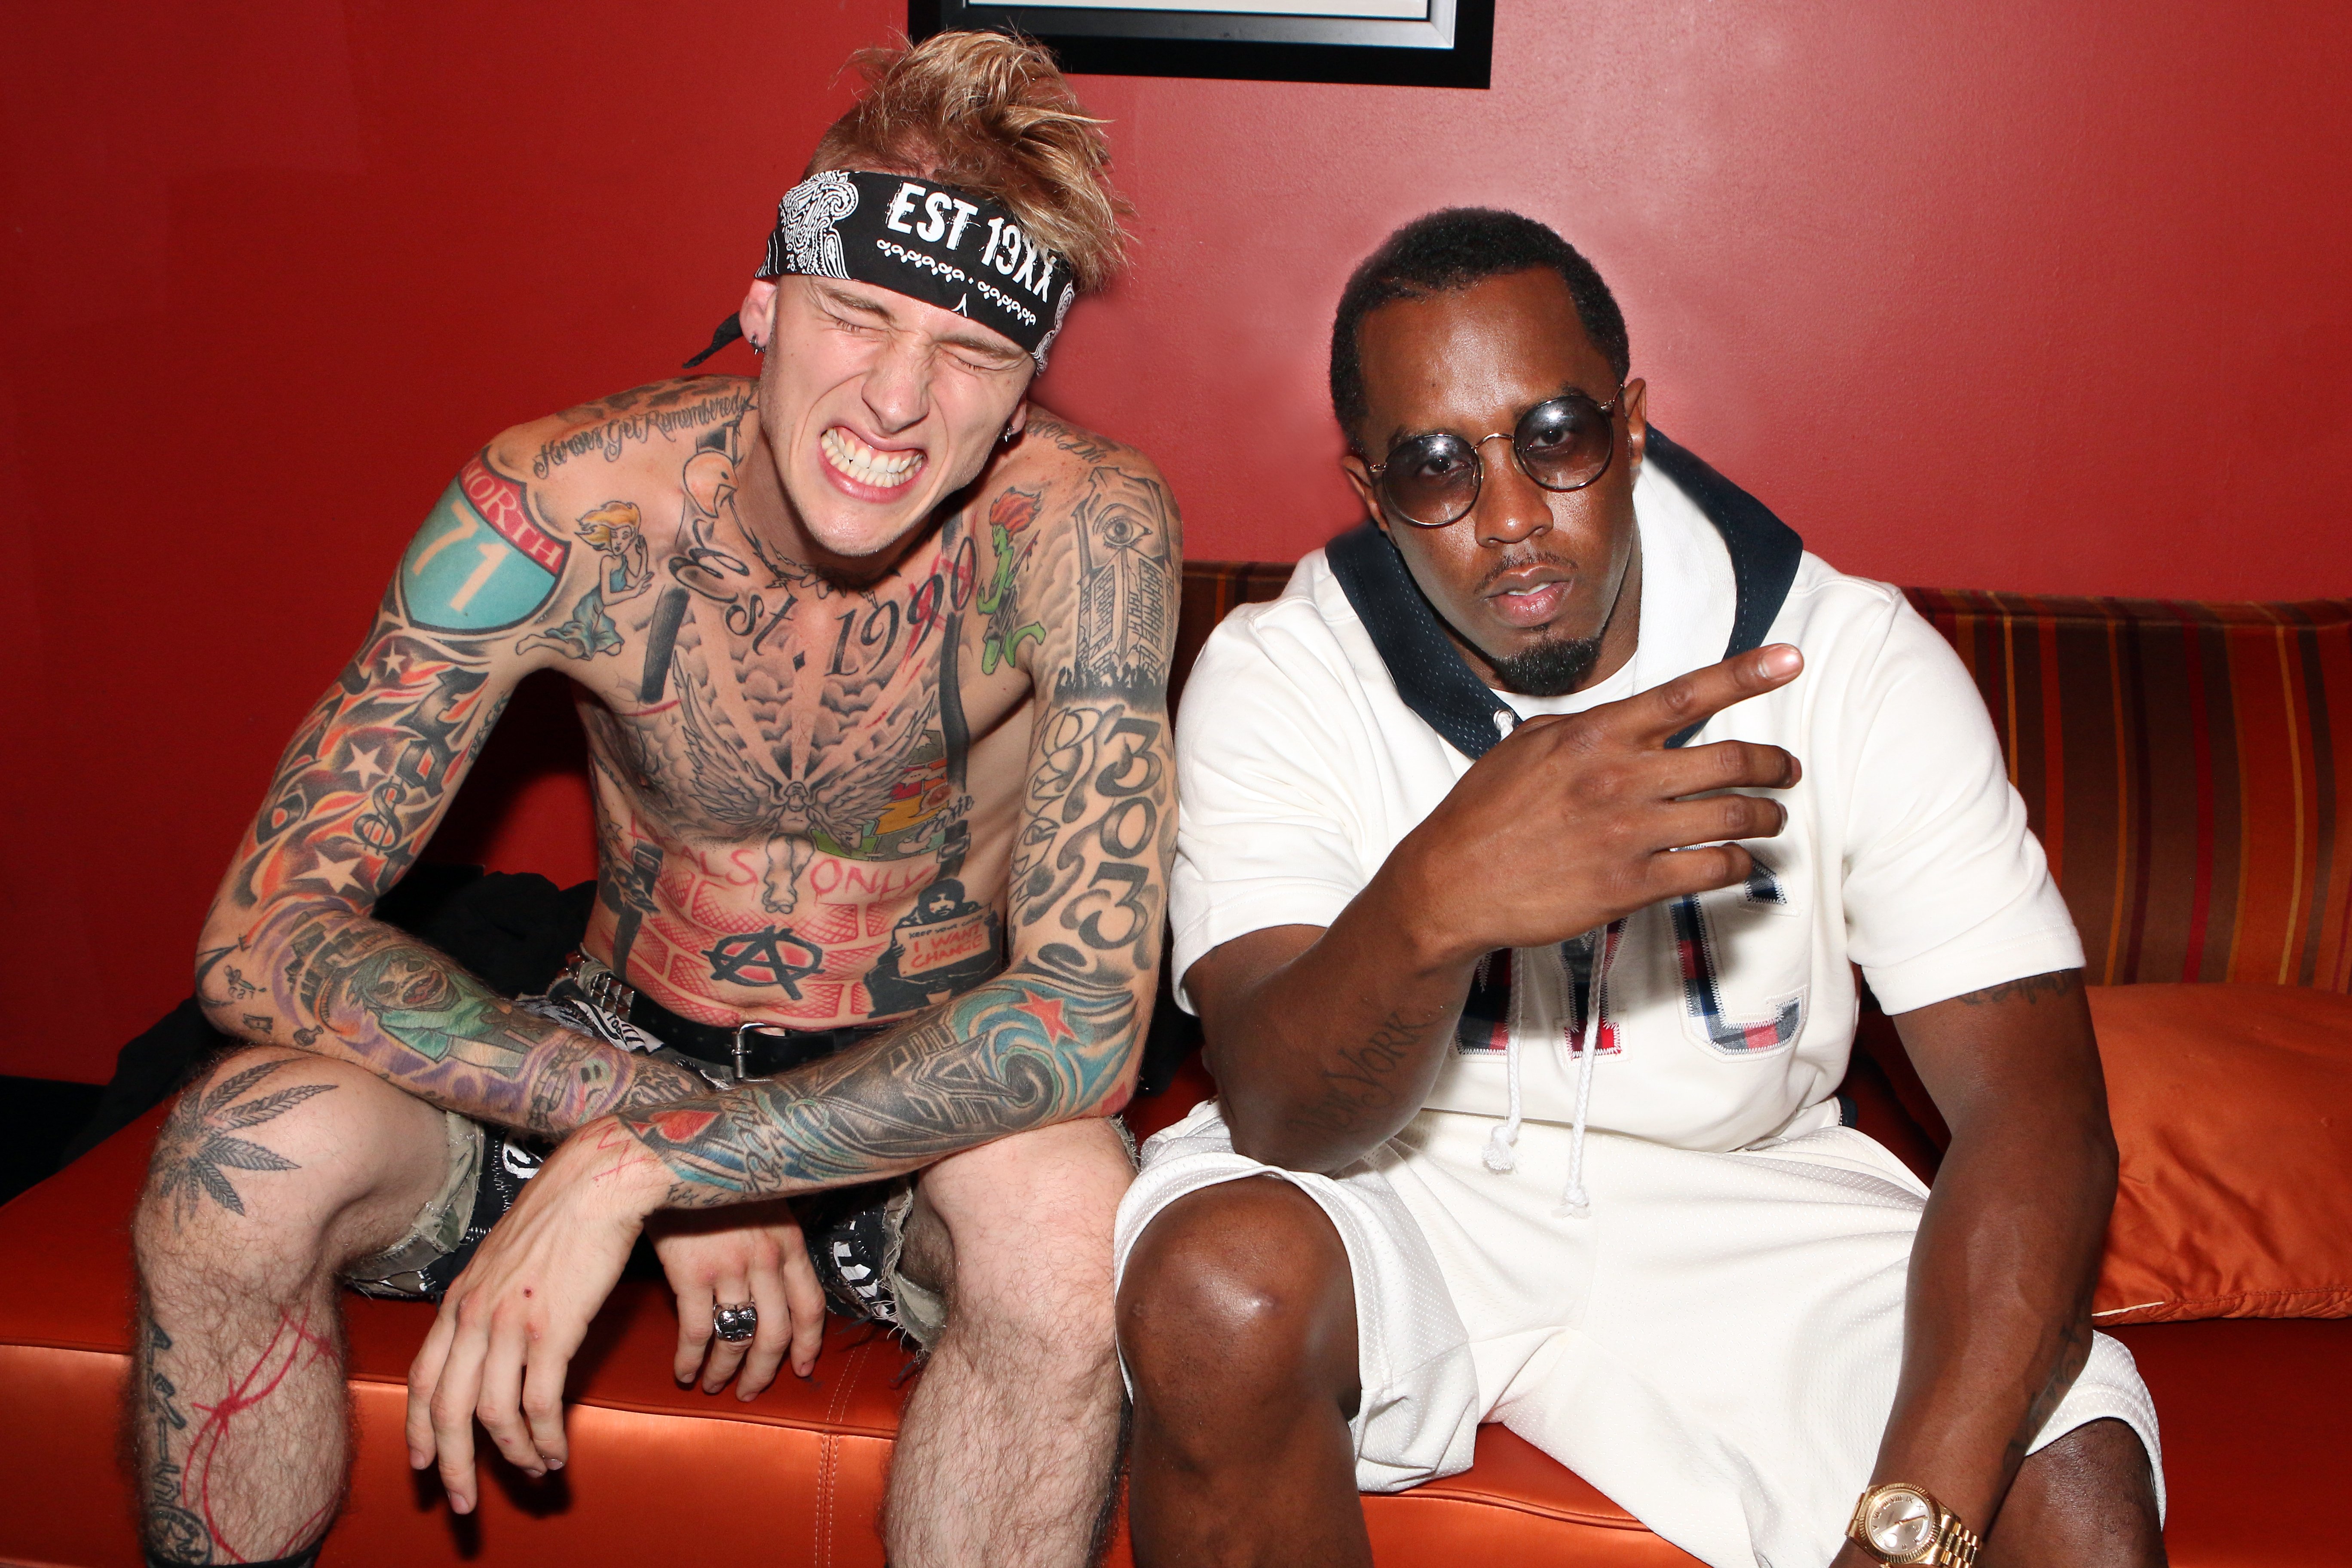  Sean 'Diddy' Combs poses with Machine Gun Kelly, who featured his "WEST 303" tattoo on his left arm. | Source: Getty Images